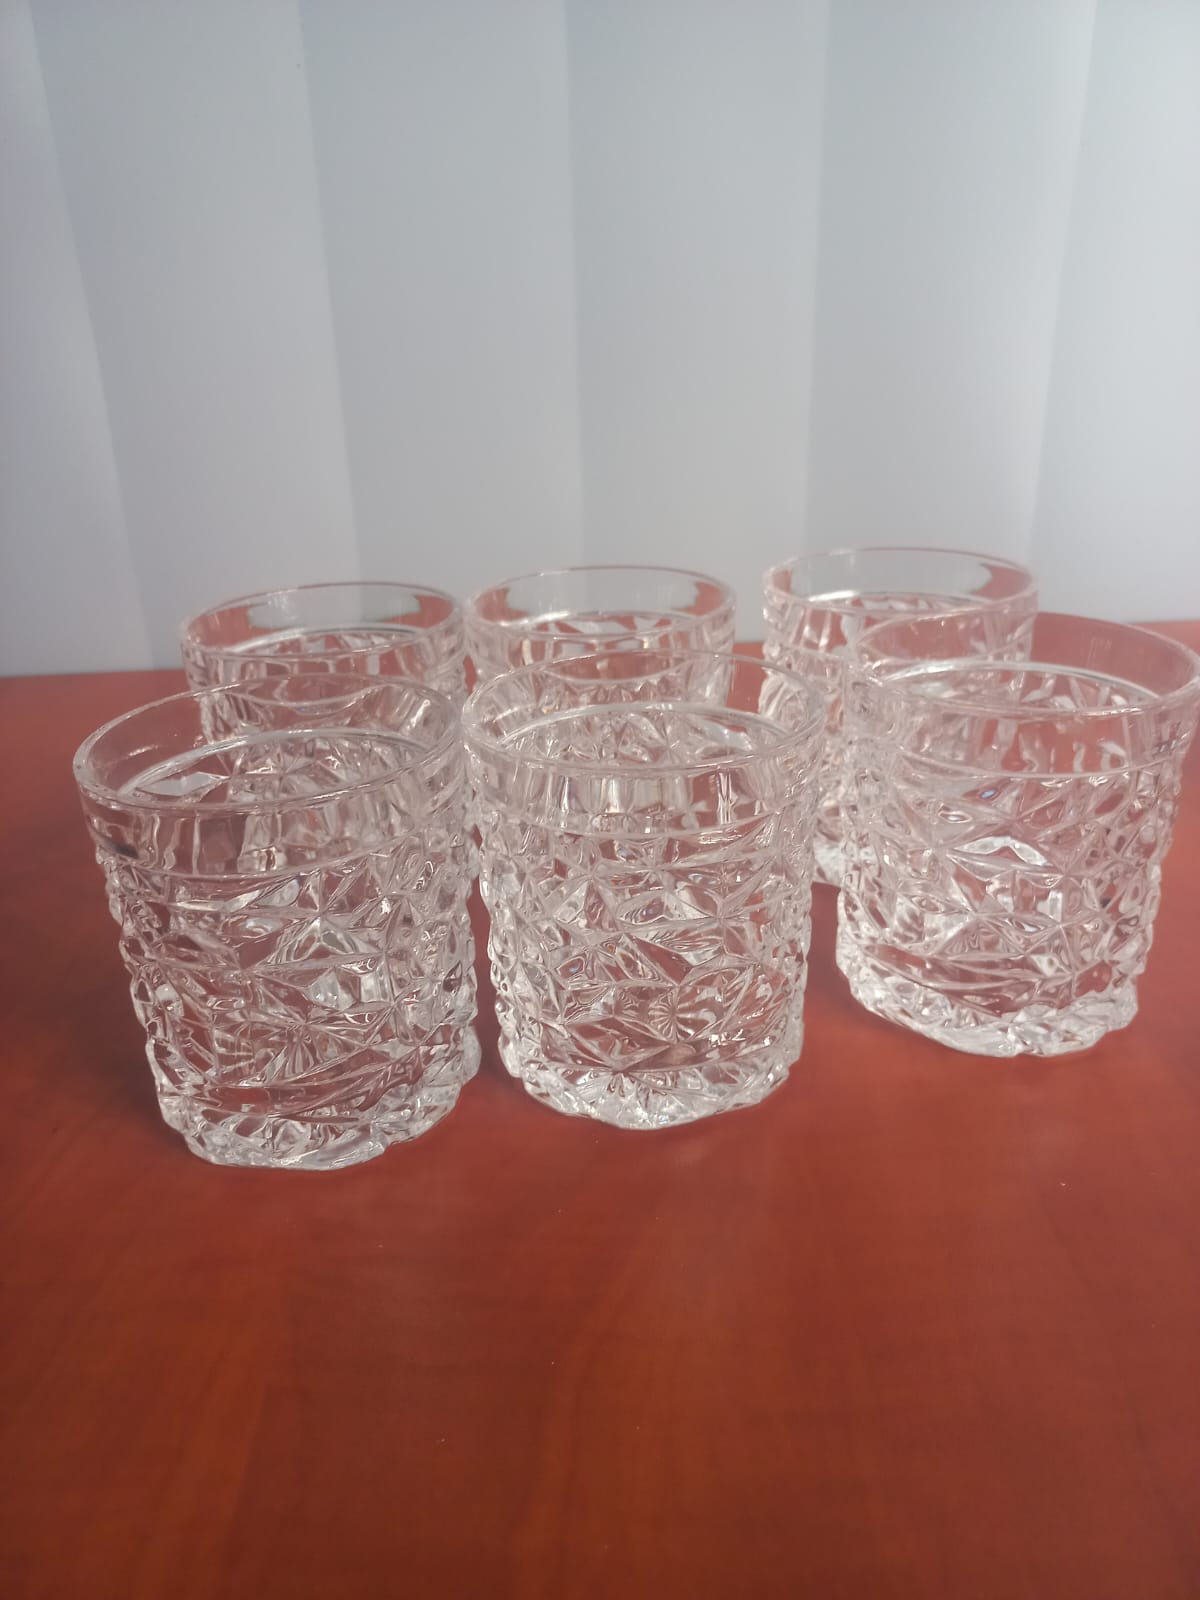 7pc ice pattern jug with 6 matching glasses